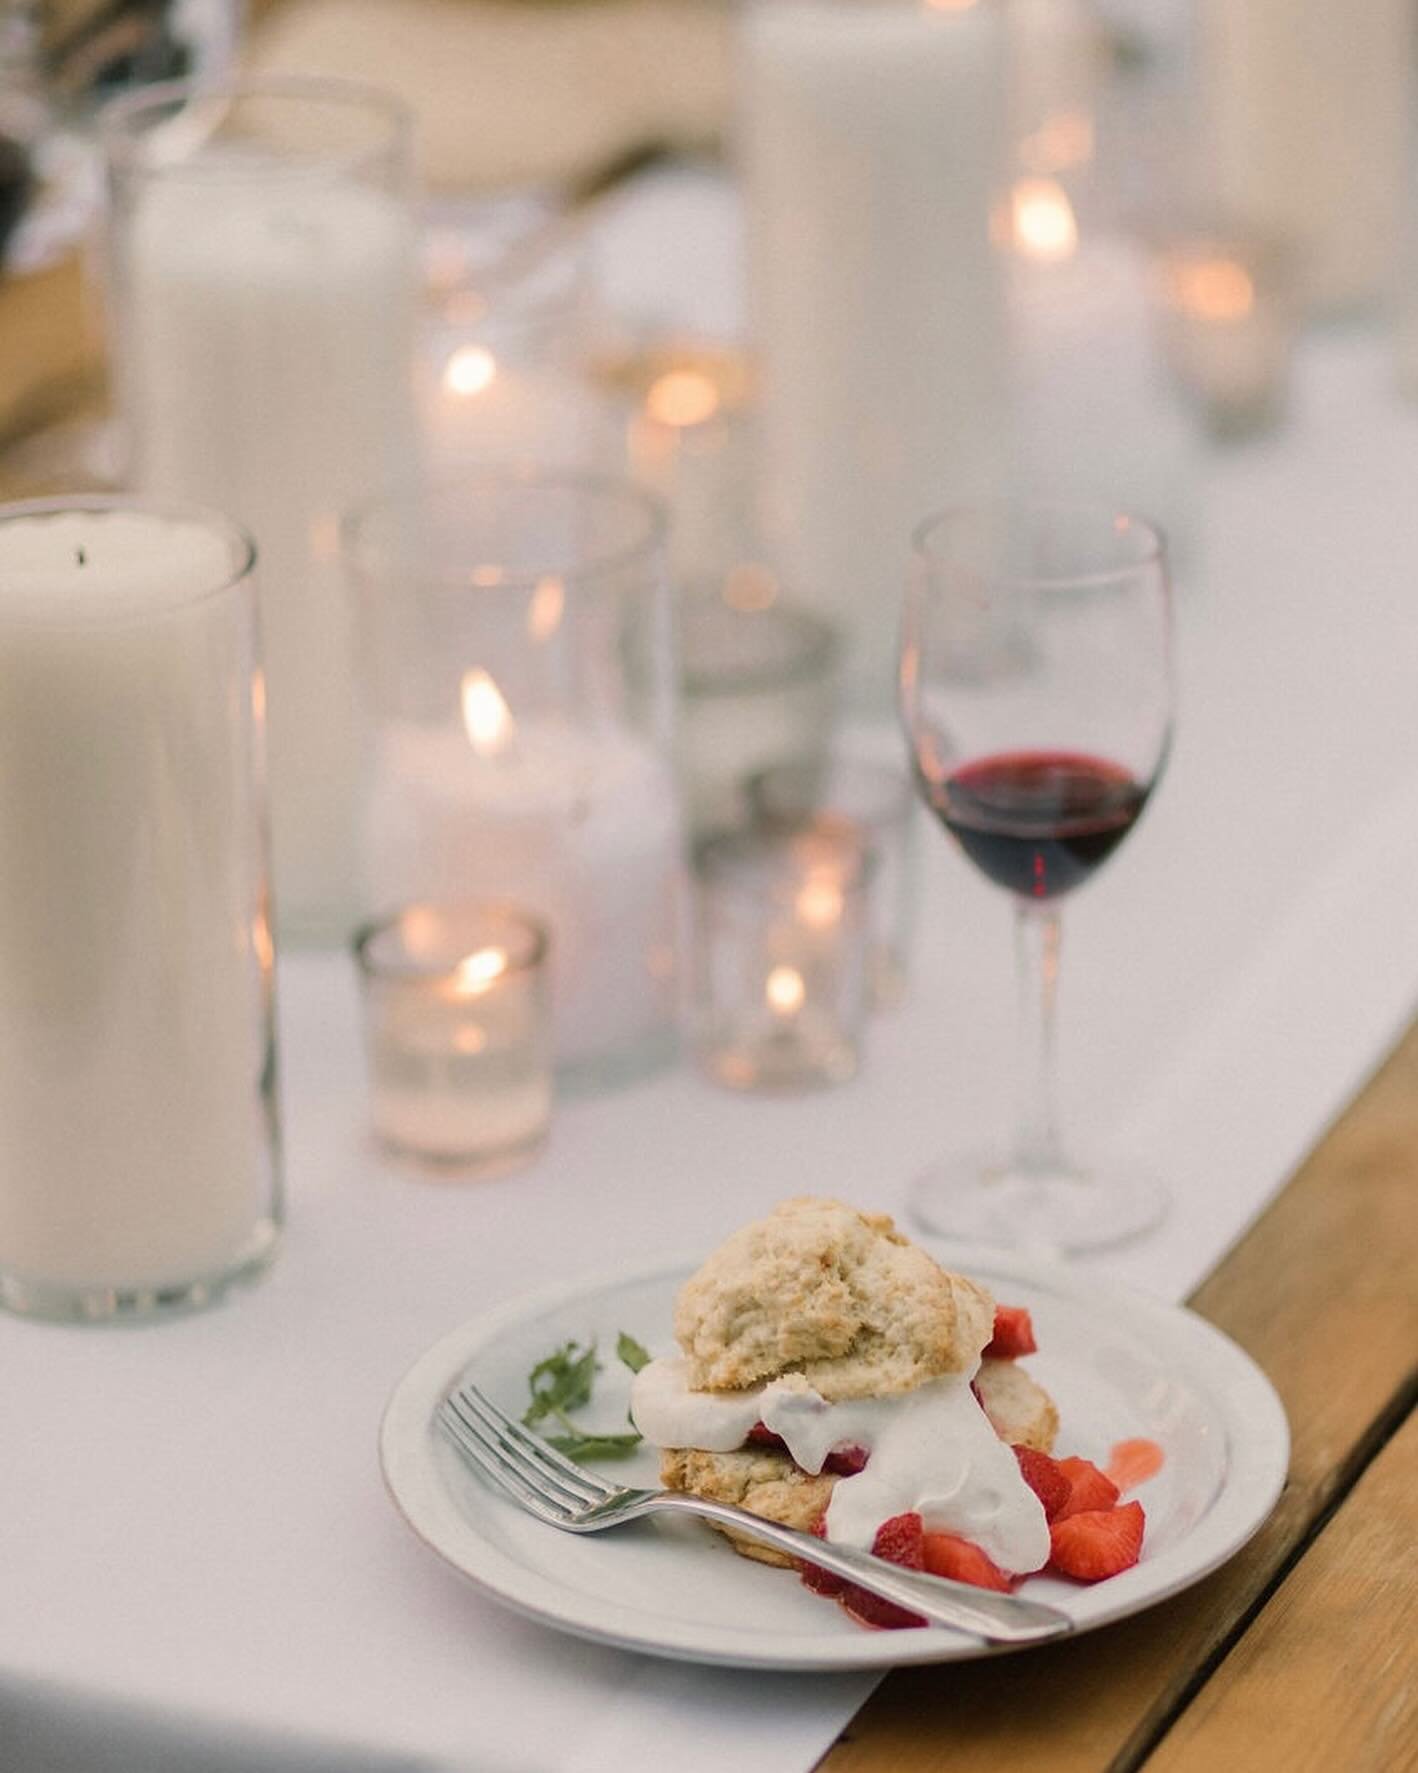 Strawberries are officially in season and berries are just around the corner! So many delicious things you can do with nature&rsquo;s candy 🍓

🍰| Strawberry Shortcake from a BDP Urban Farm wedding 📸 reddenrwood 
🎨| Pavlova from a past Urban Farm 